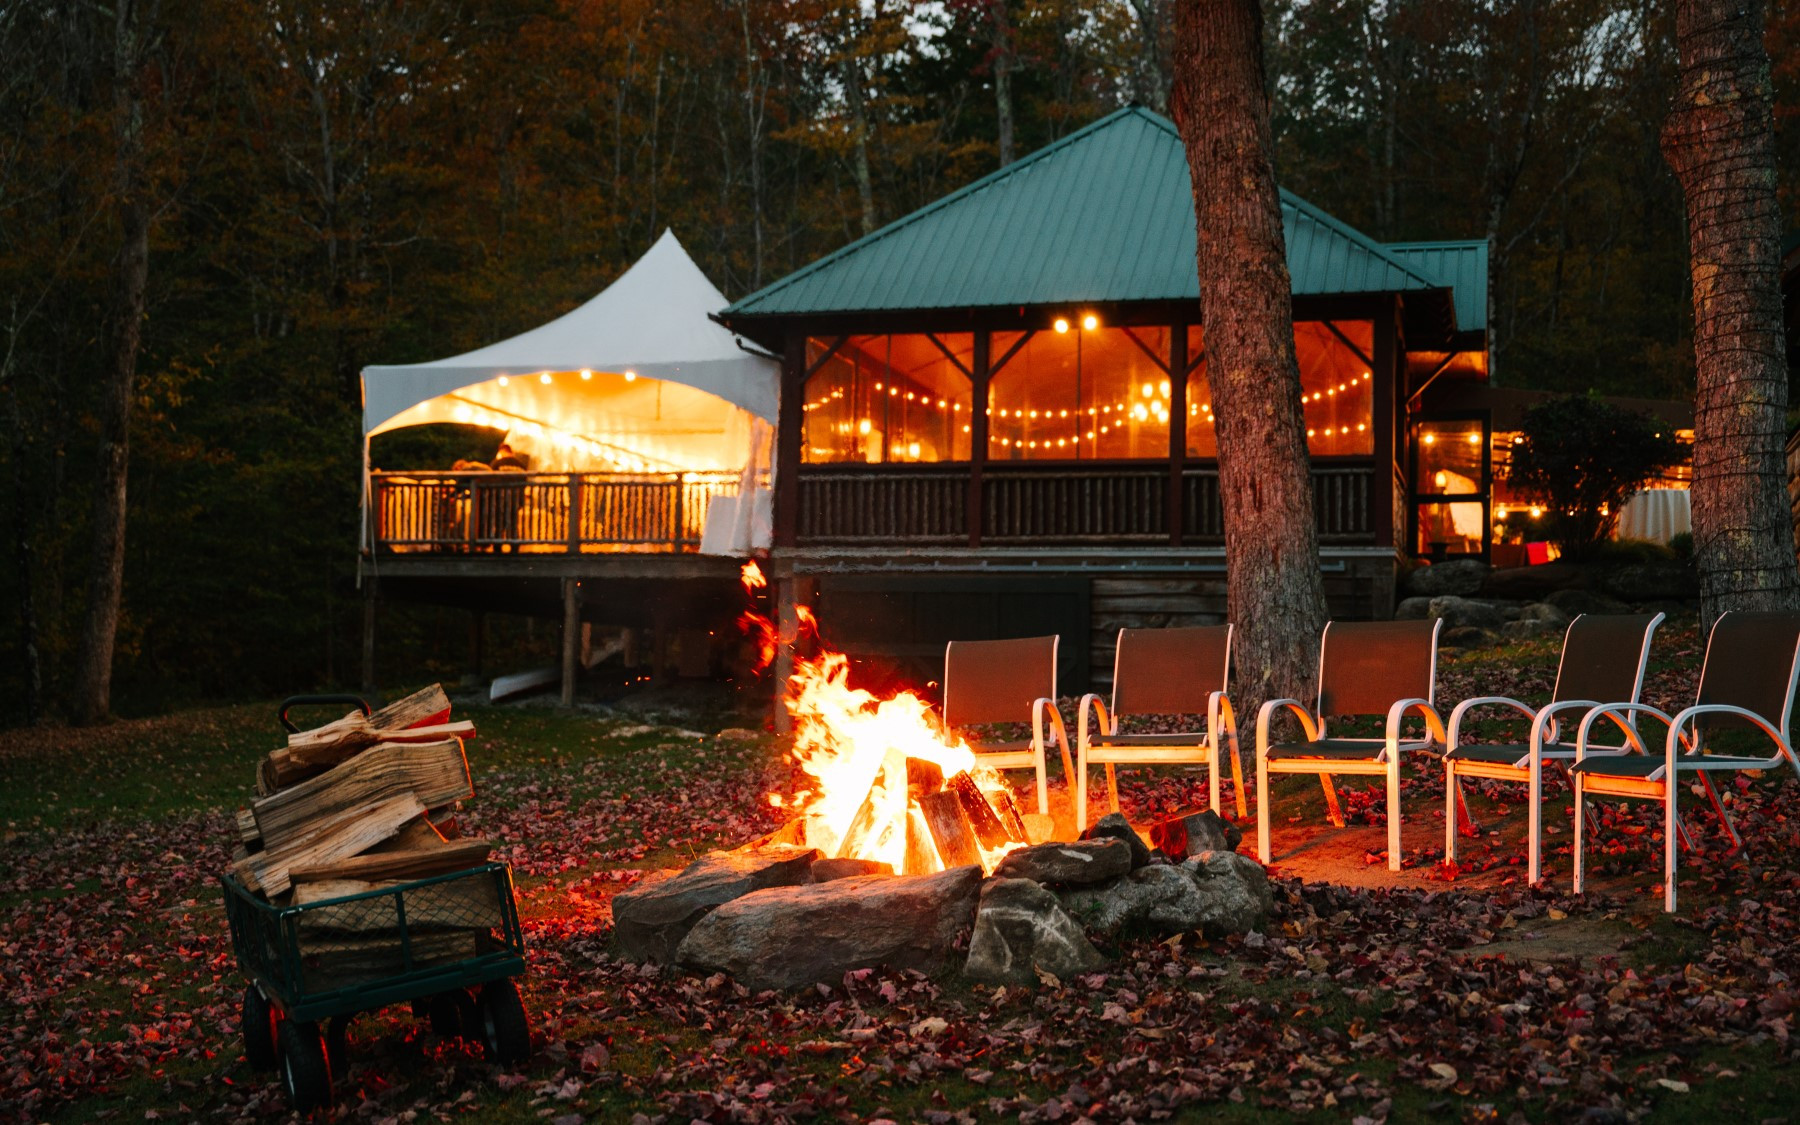 beach pavilion exterior featuring a white tent on the deck portion with a green roof on the main building. front of image showcases a firepit ablaze with a few chairs surrounding it and a wagon full of wood next to it.